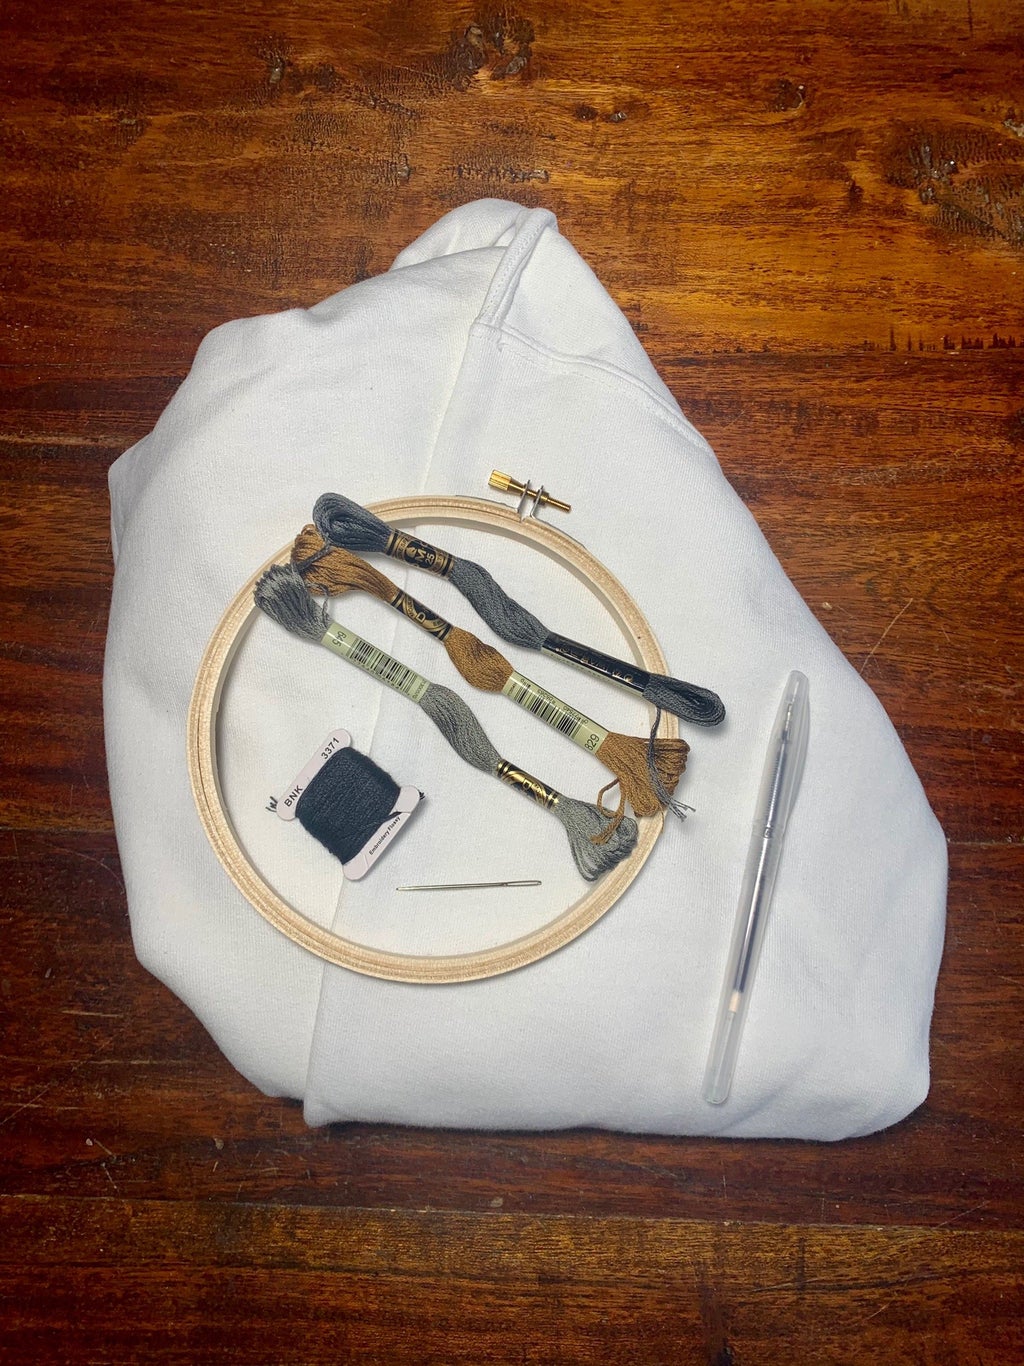 Supplies used for appa embroidery